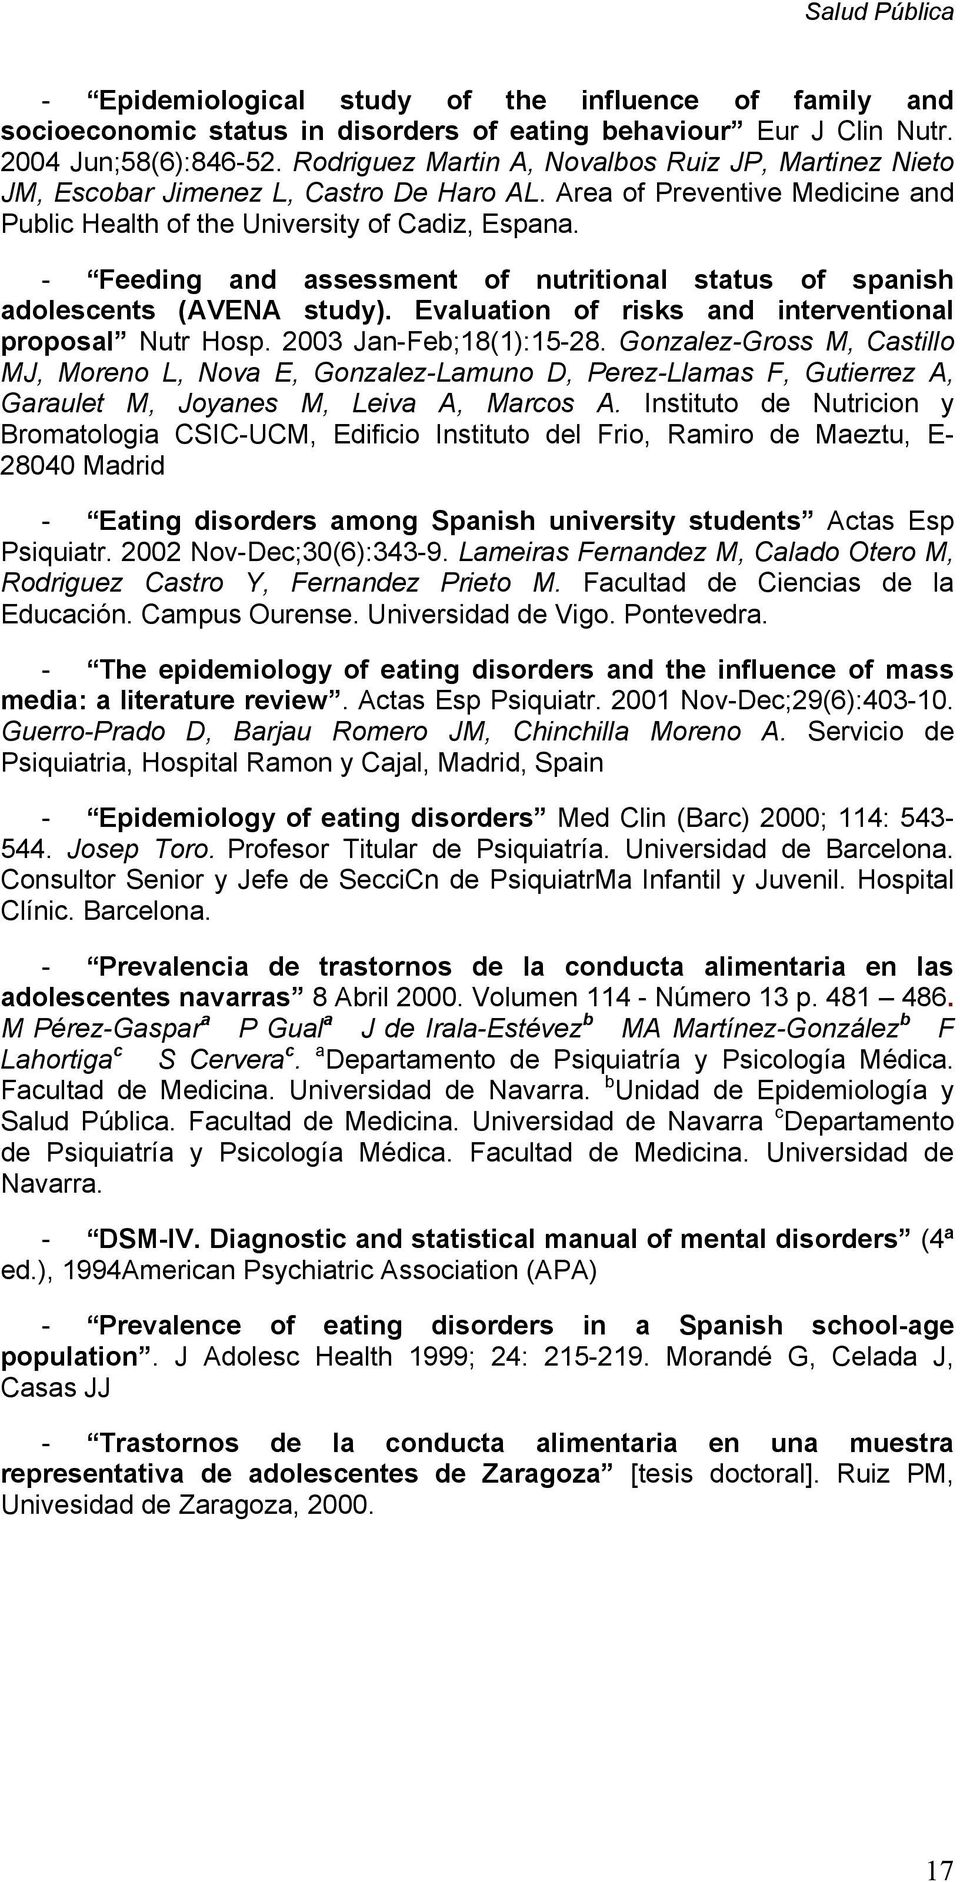 - Feeding and assessment of nutritional status of spanish adolescents (AVENA study). Evaluation of risks and interventional proposal Nutr Hosp. 2003 Jan-Feb;18(1):15-28.